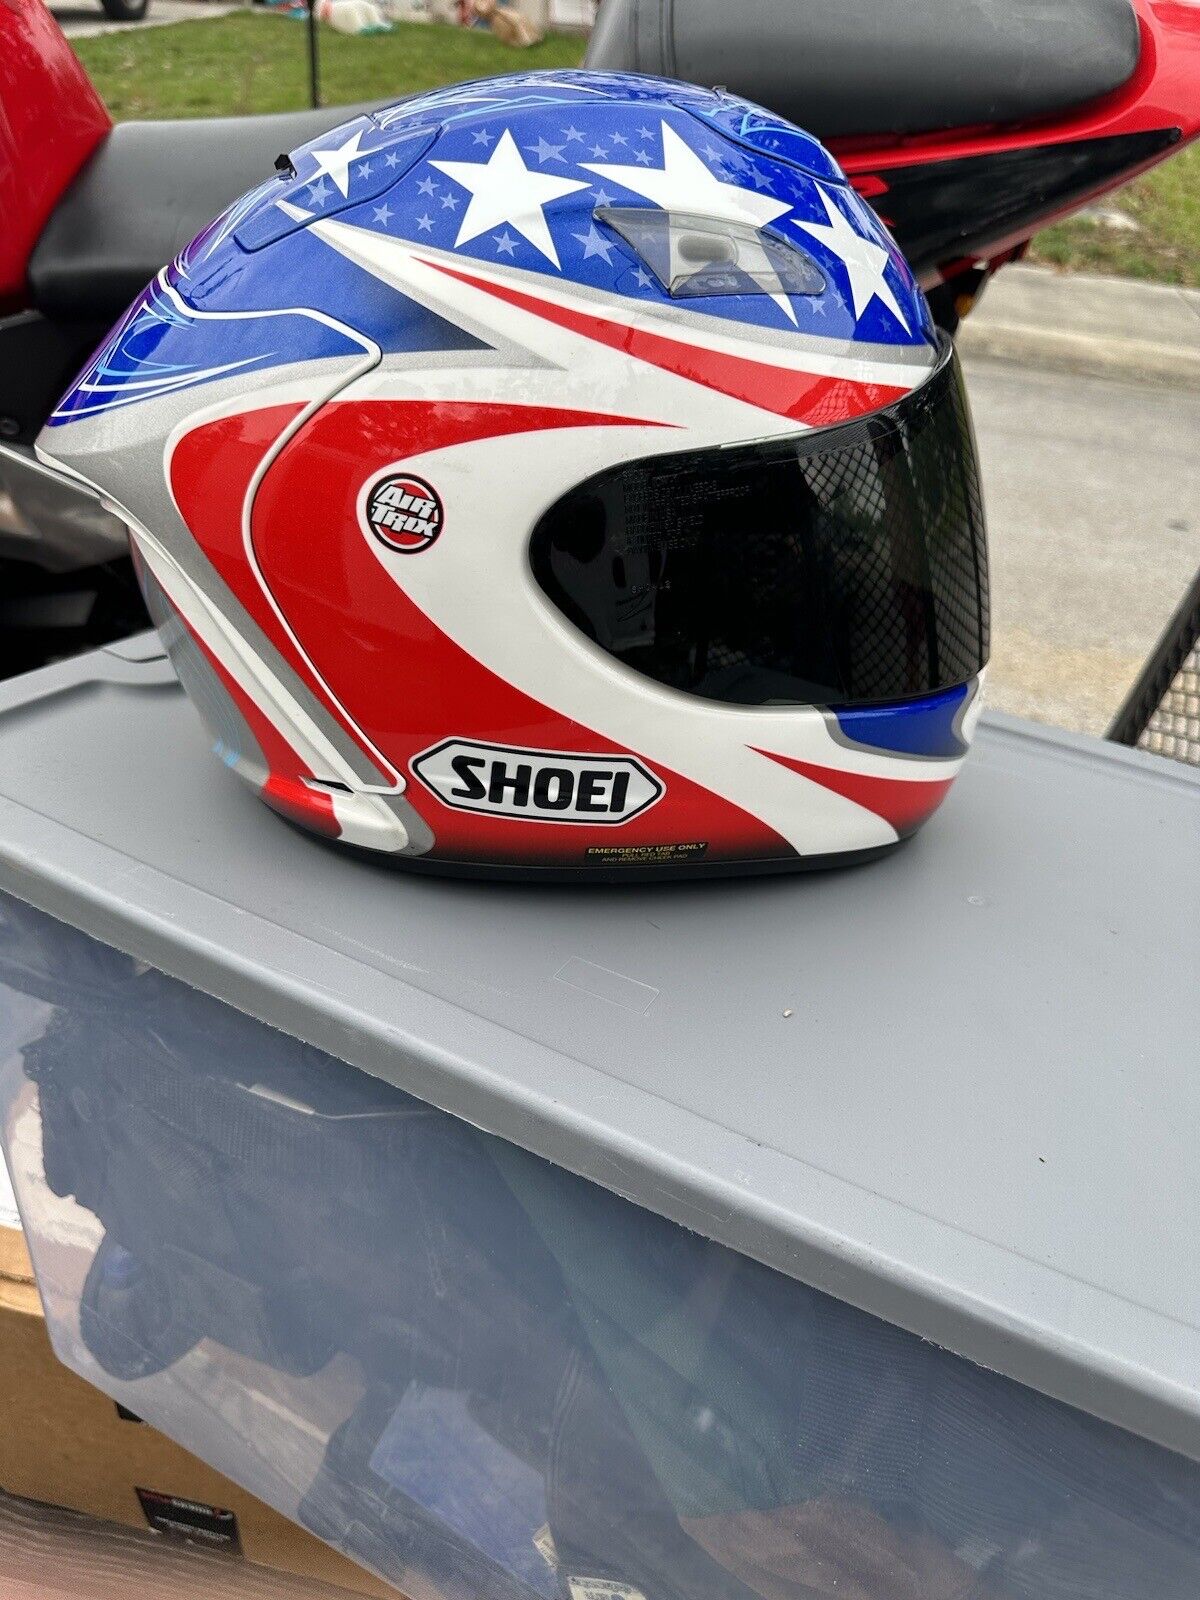 SOLD Shoei Full Face Motorcycle Helmet Red White Blue Silver with Stars Large